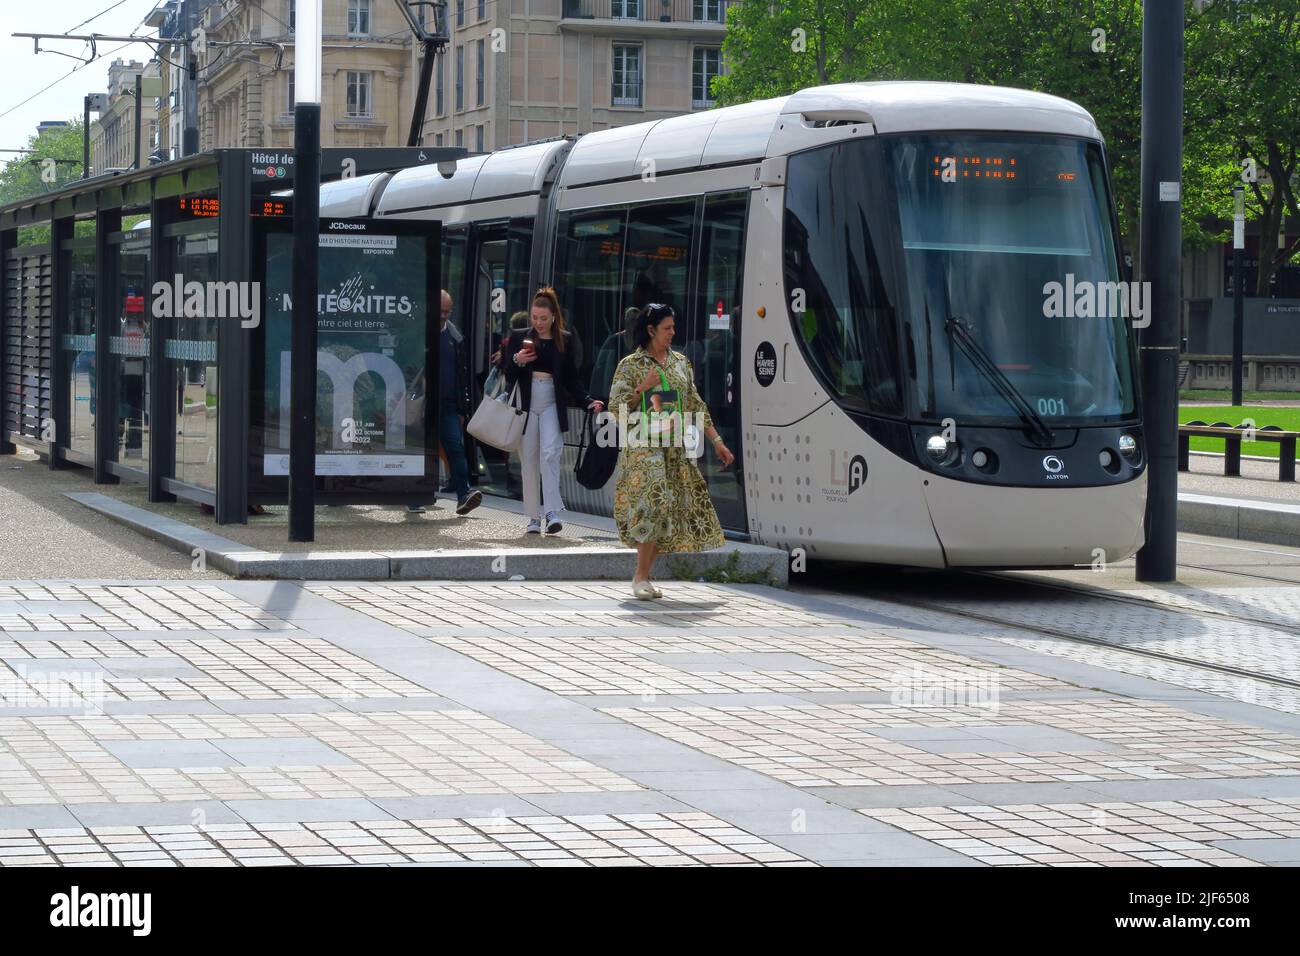 A city tram at a stop outside the Hotel de Ville, City Hall in the French port of Le Havre. Stock Photo